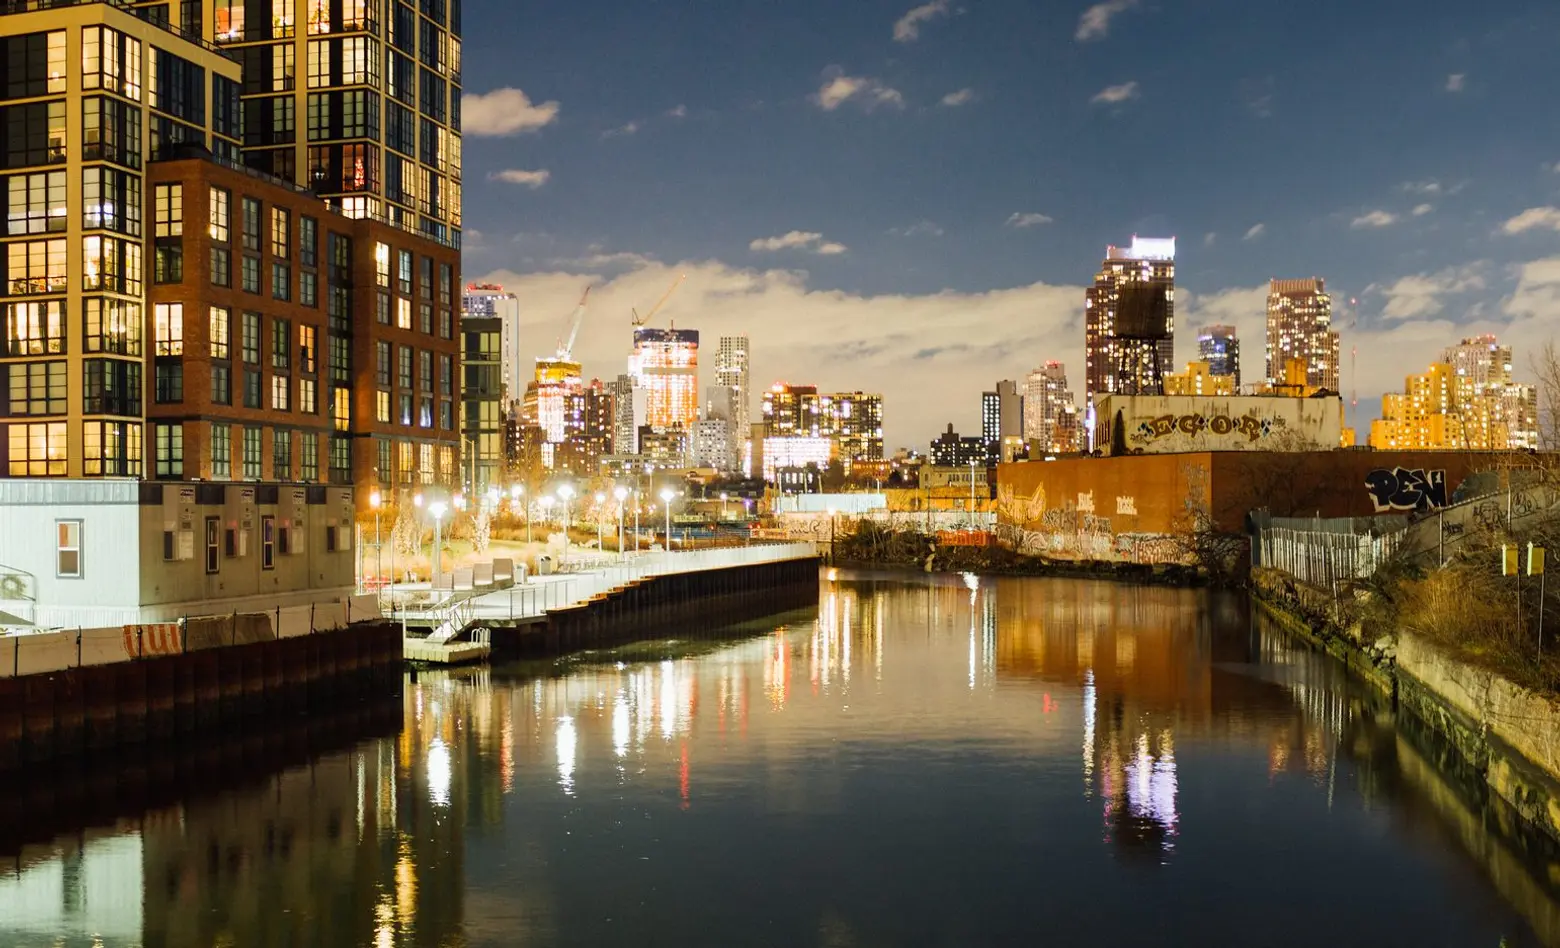 Gowanus rezoning deal reached, with affordable housing and sewer upgrades on board